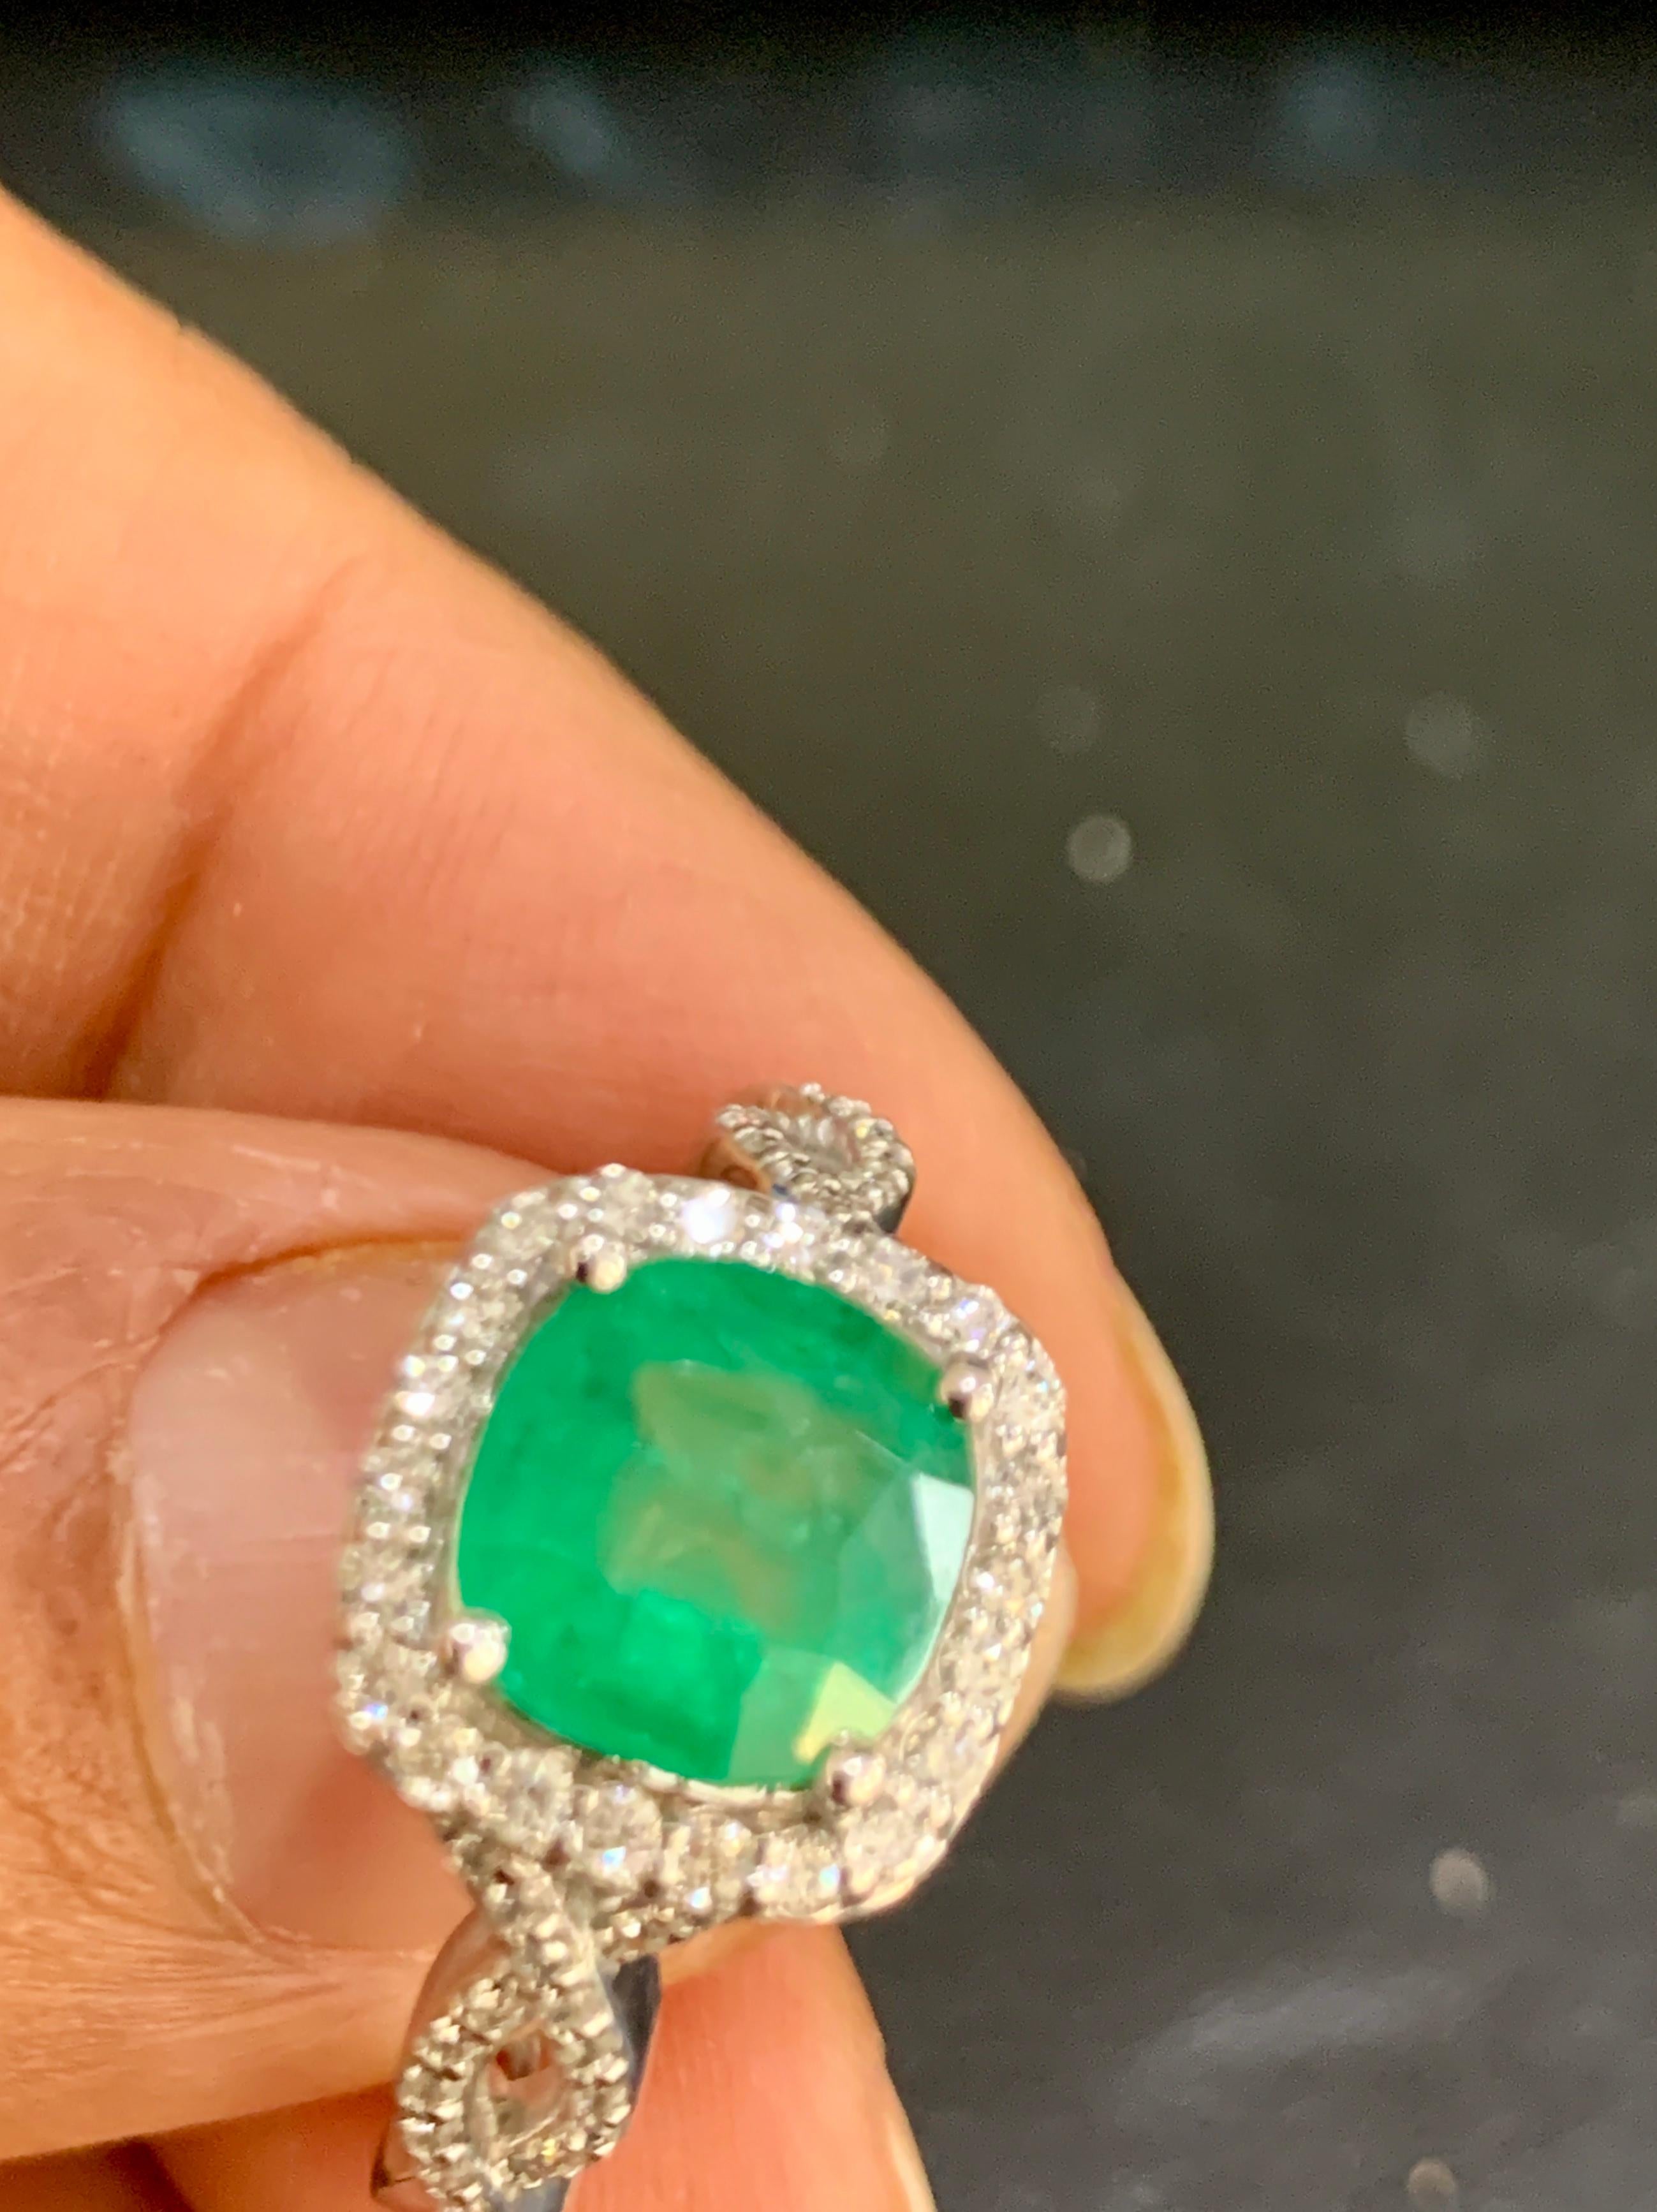 Designer Effy's 1.8 Carat Emerald And Diamond  Cocktail Ring 14 Karat White Gold
One 8 mm square emerald approximately 1.8 ct
Total  Approximately 0.35 ct  Brilliant cut round diamonds .
34 diamonds are 0.4 pointer and 22 are 1 pointer